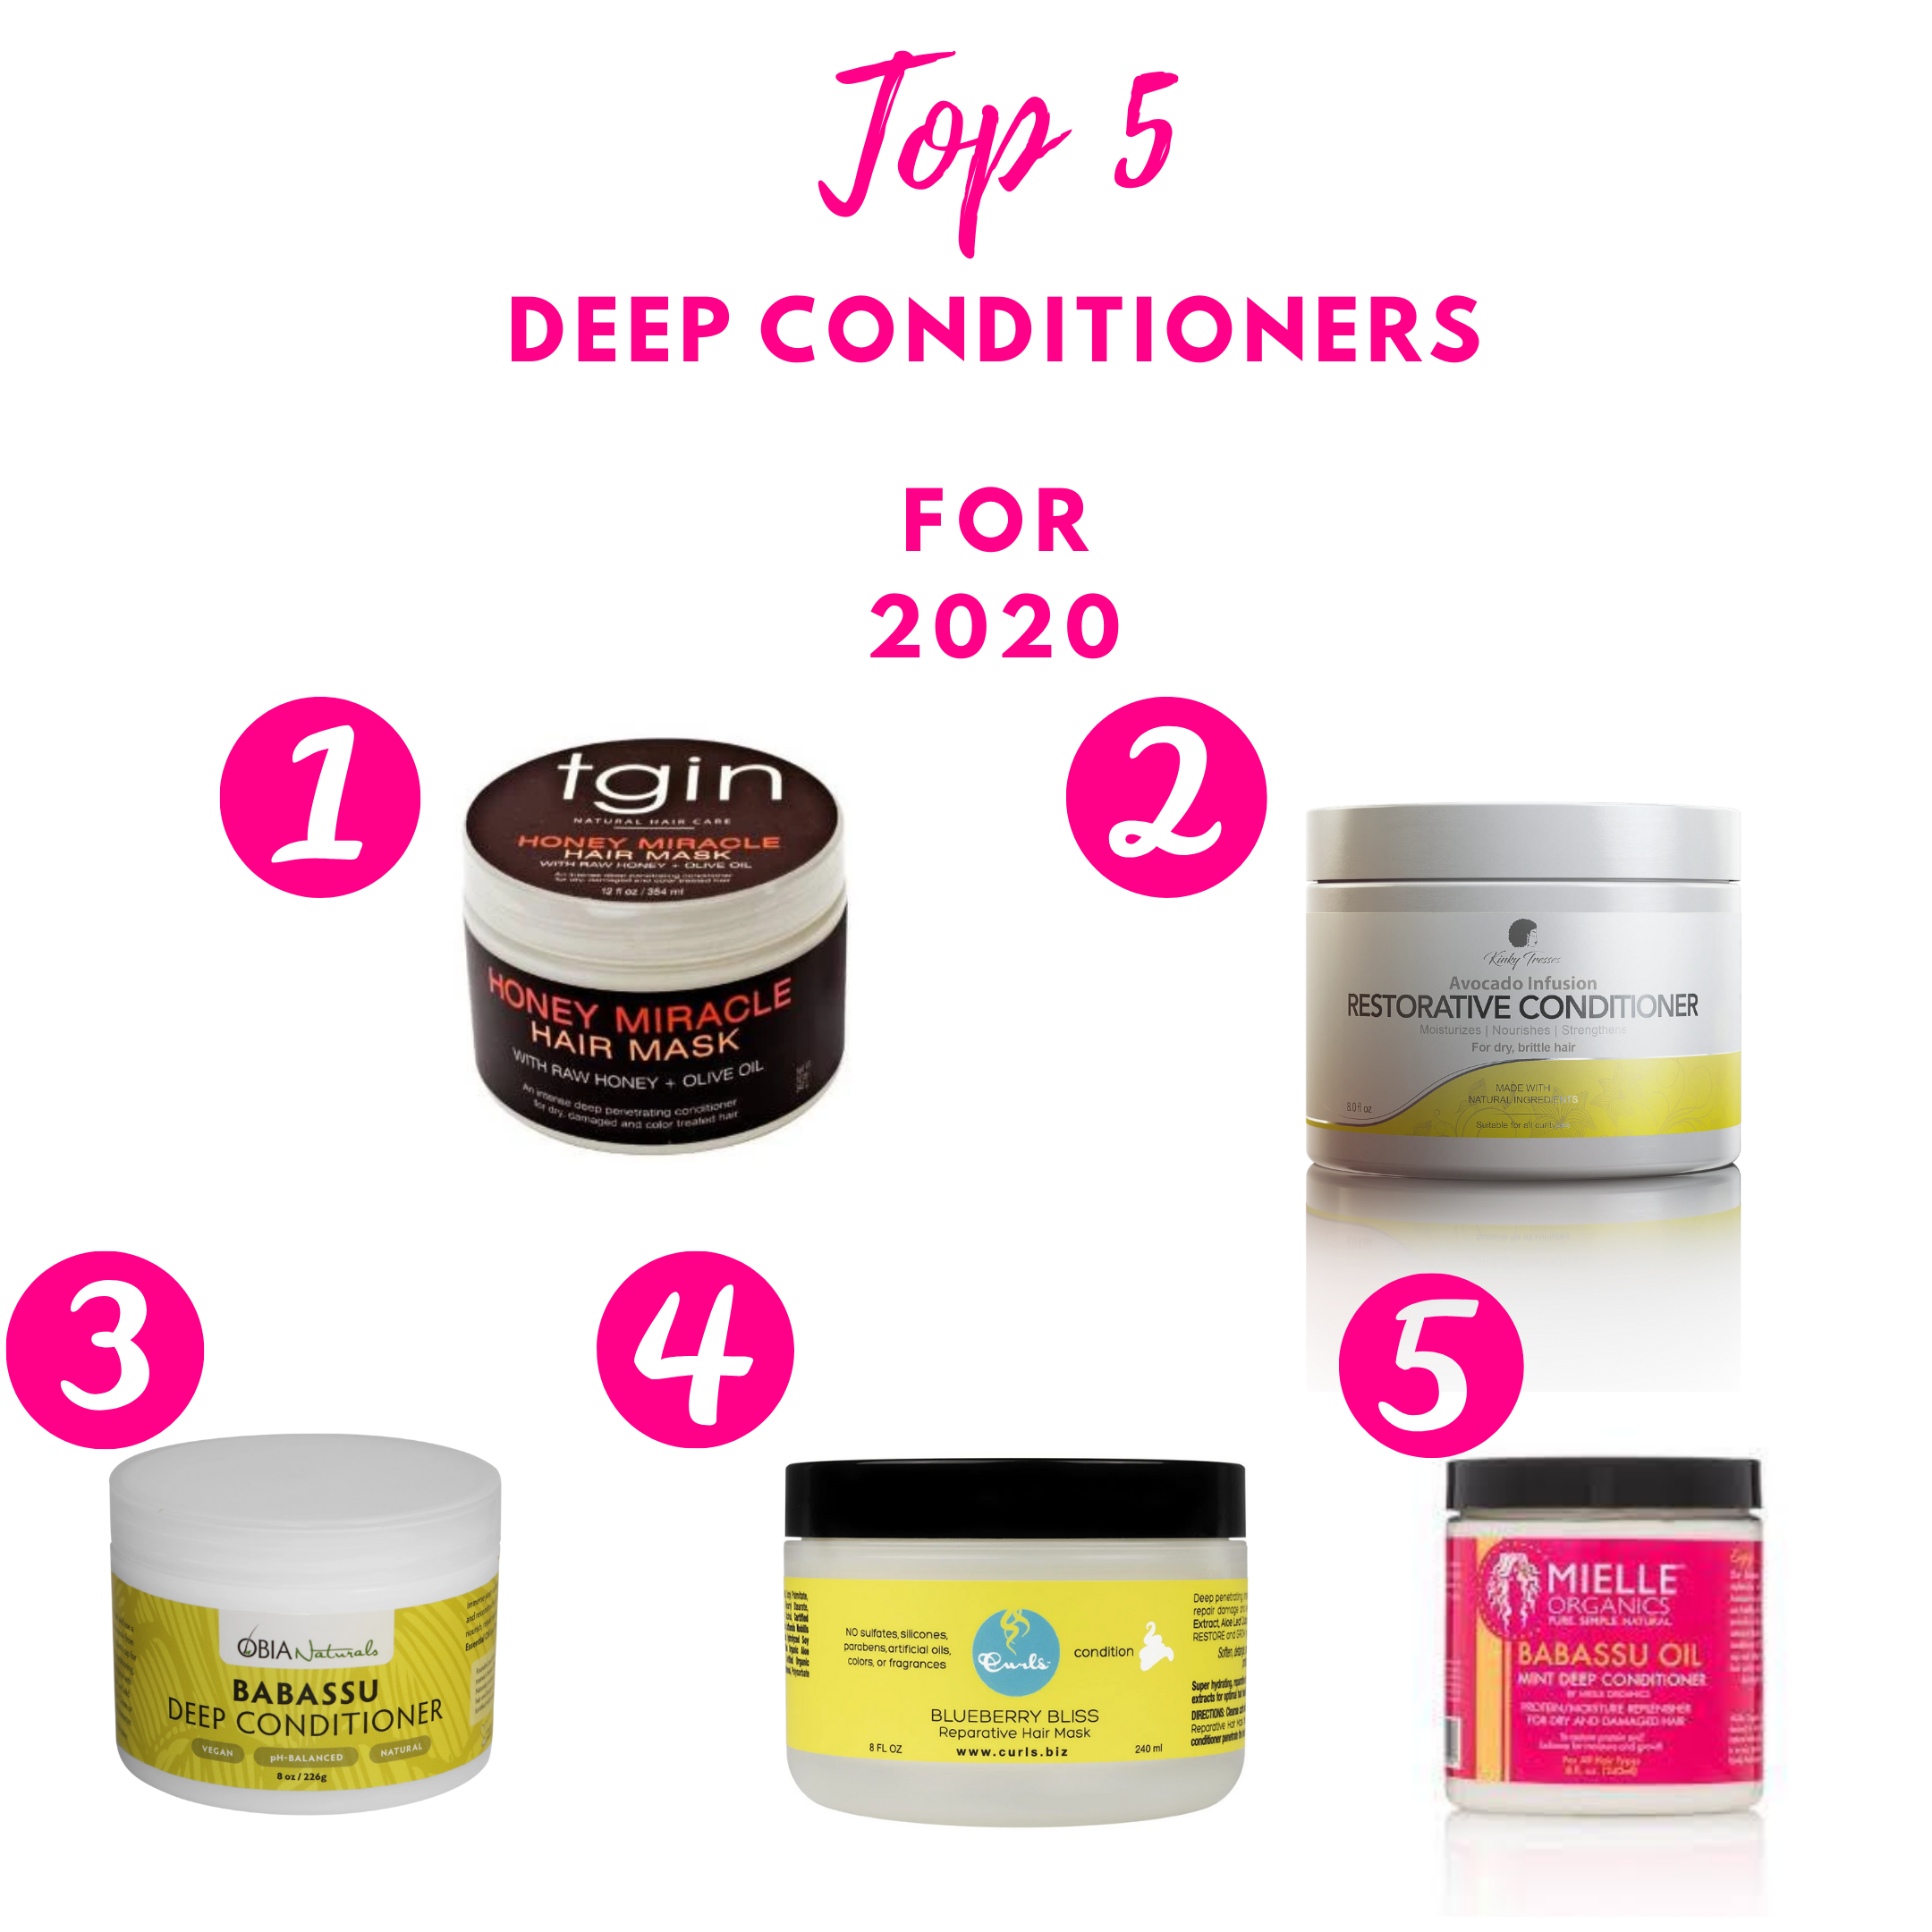 Top 5 Deep Conditioners For 2020